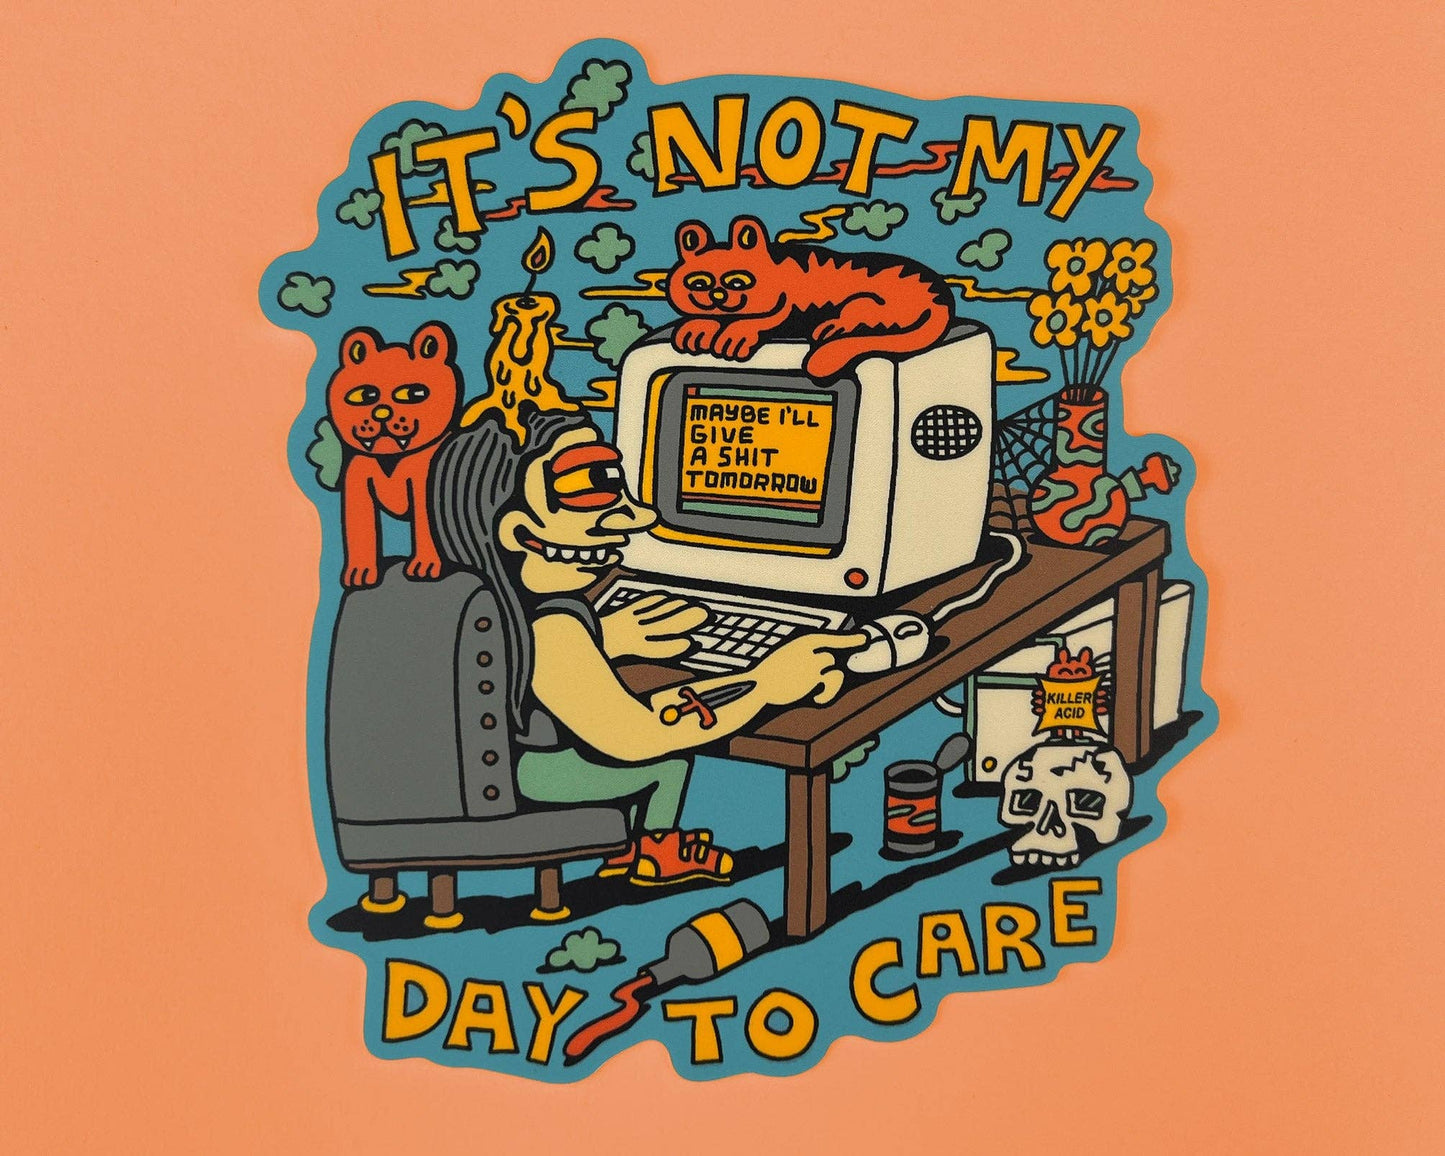 Not My Day to Care Sticker